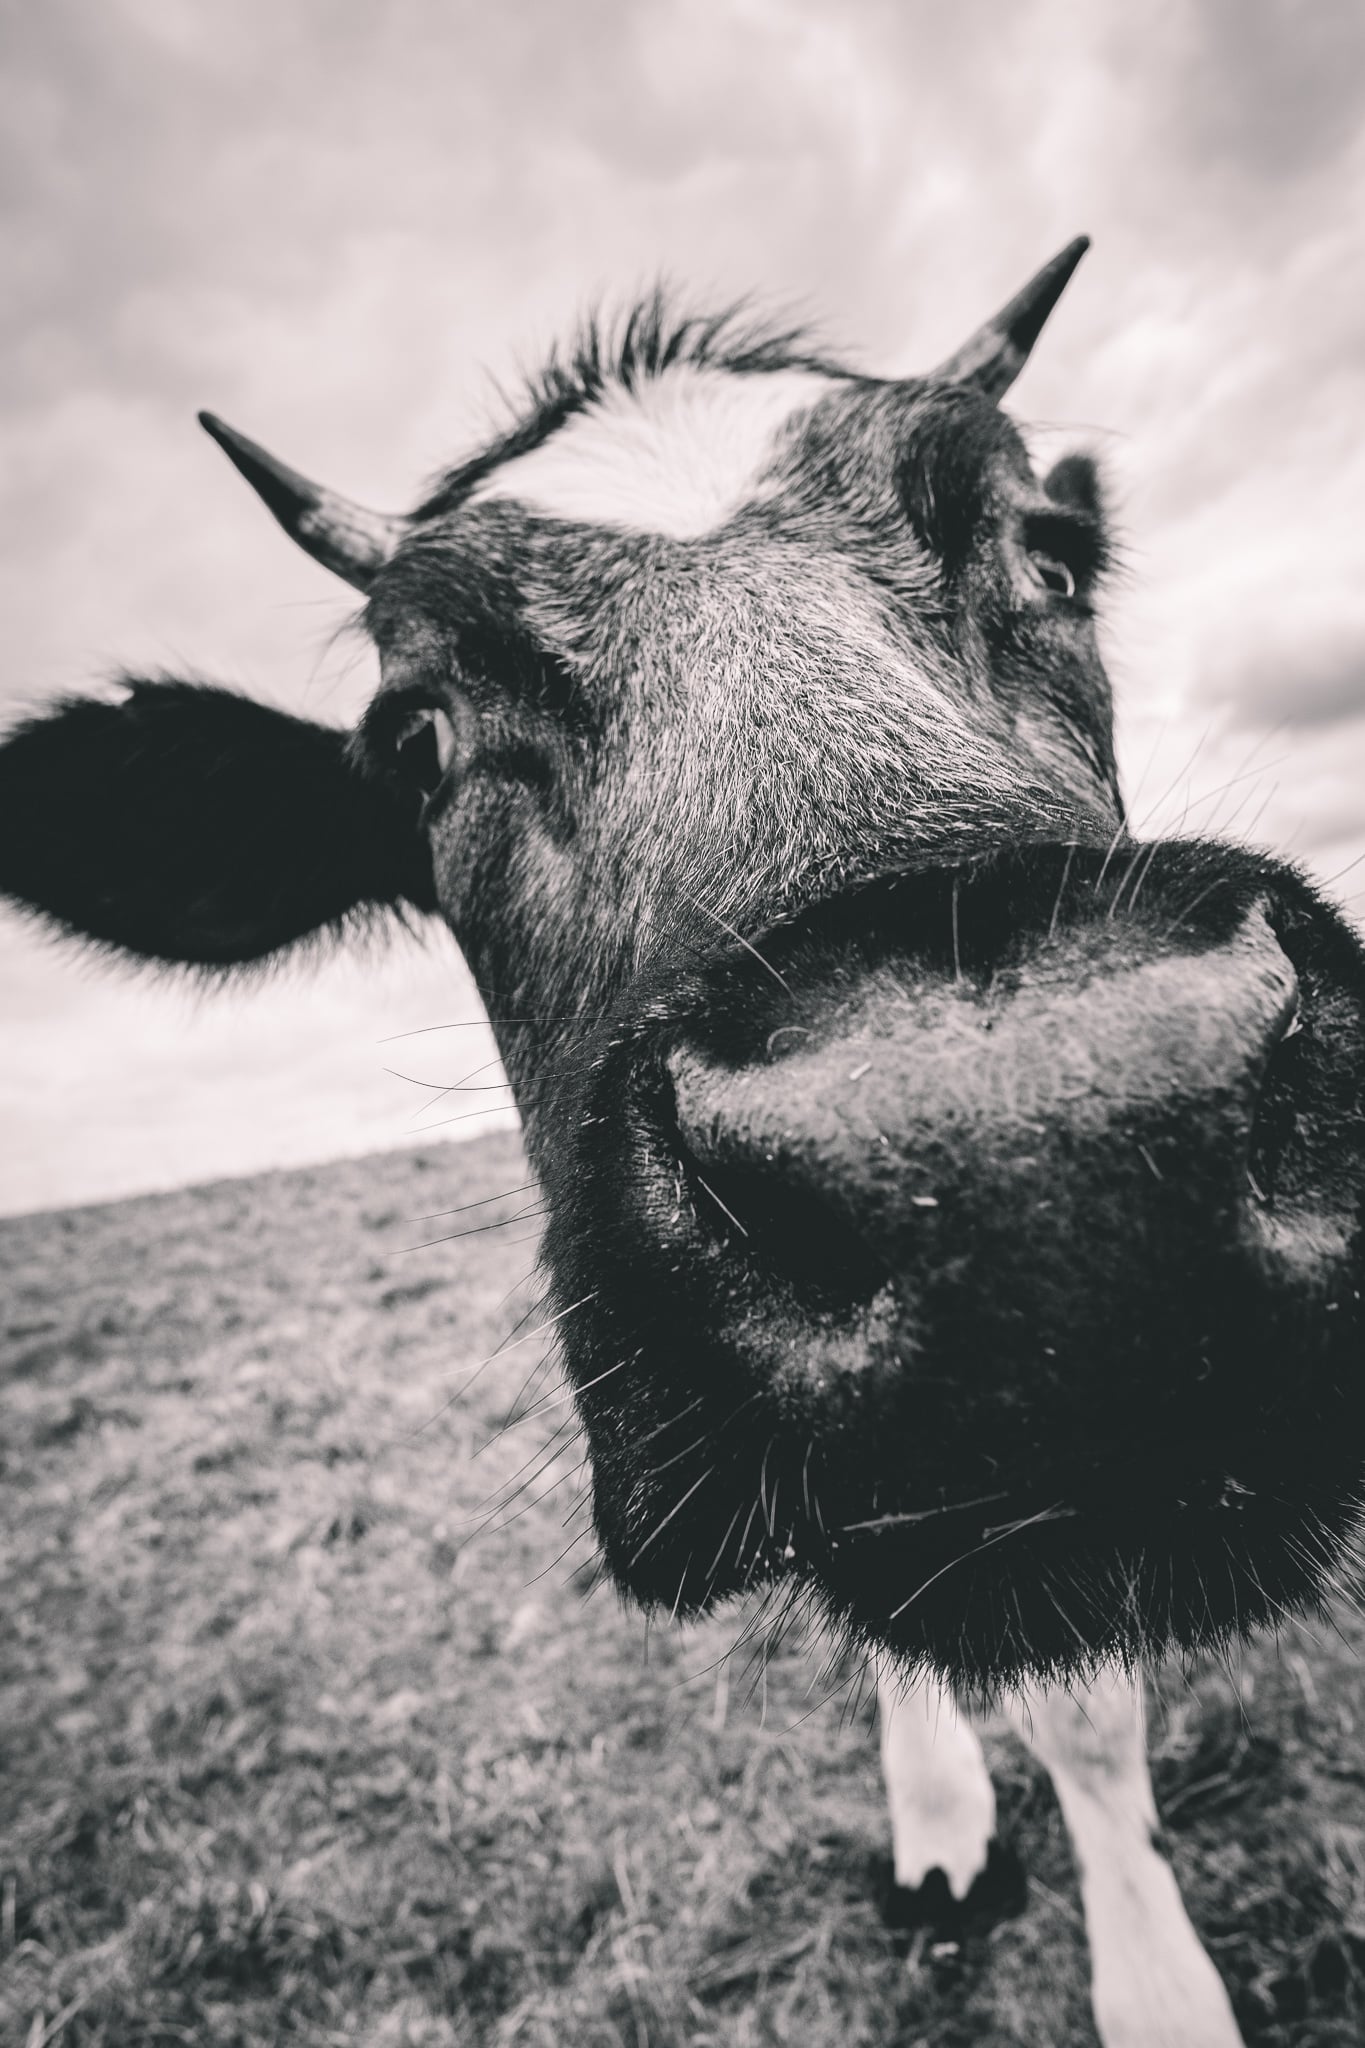 Closeup of a cattle looking up at the camera